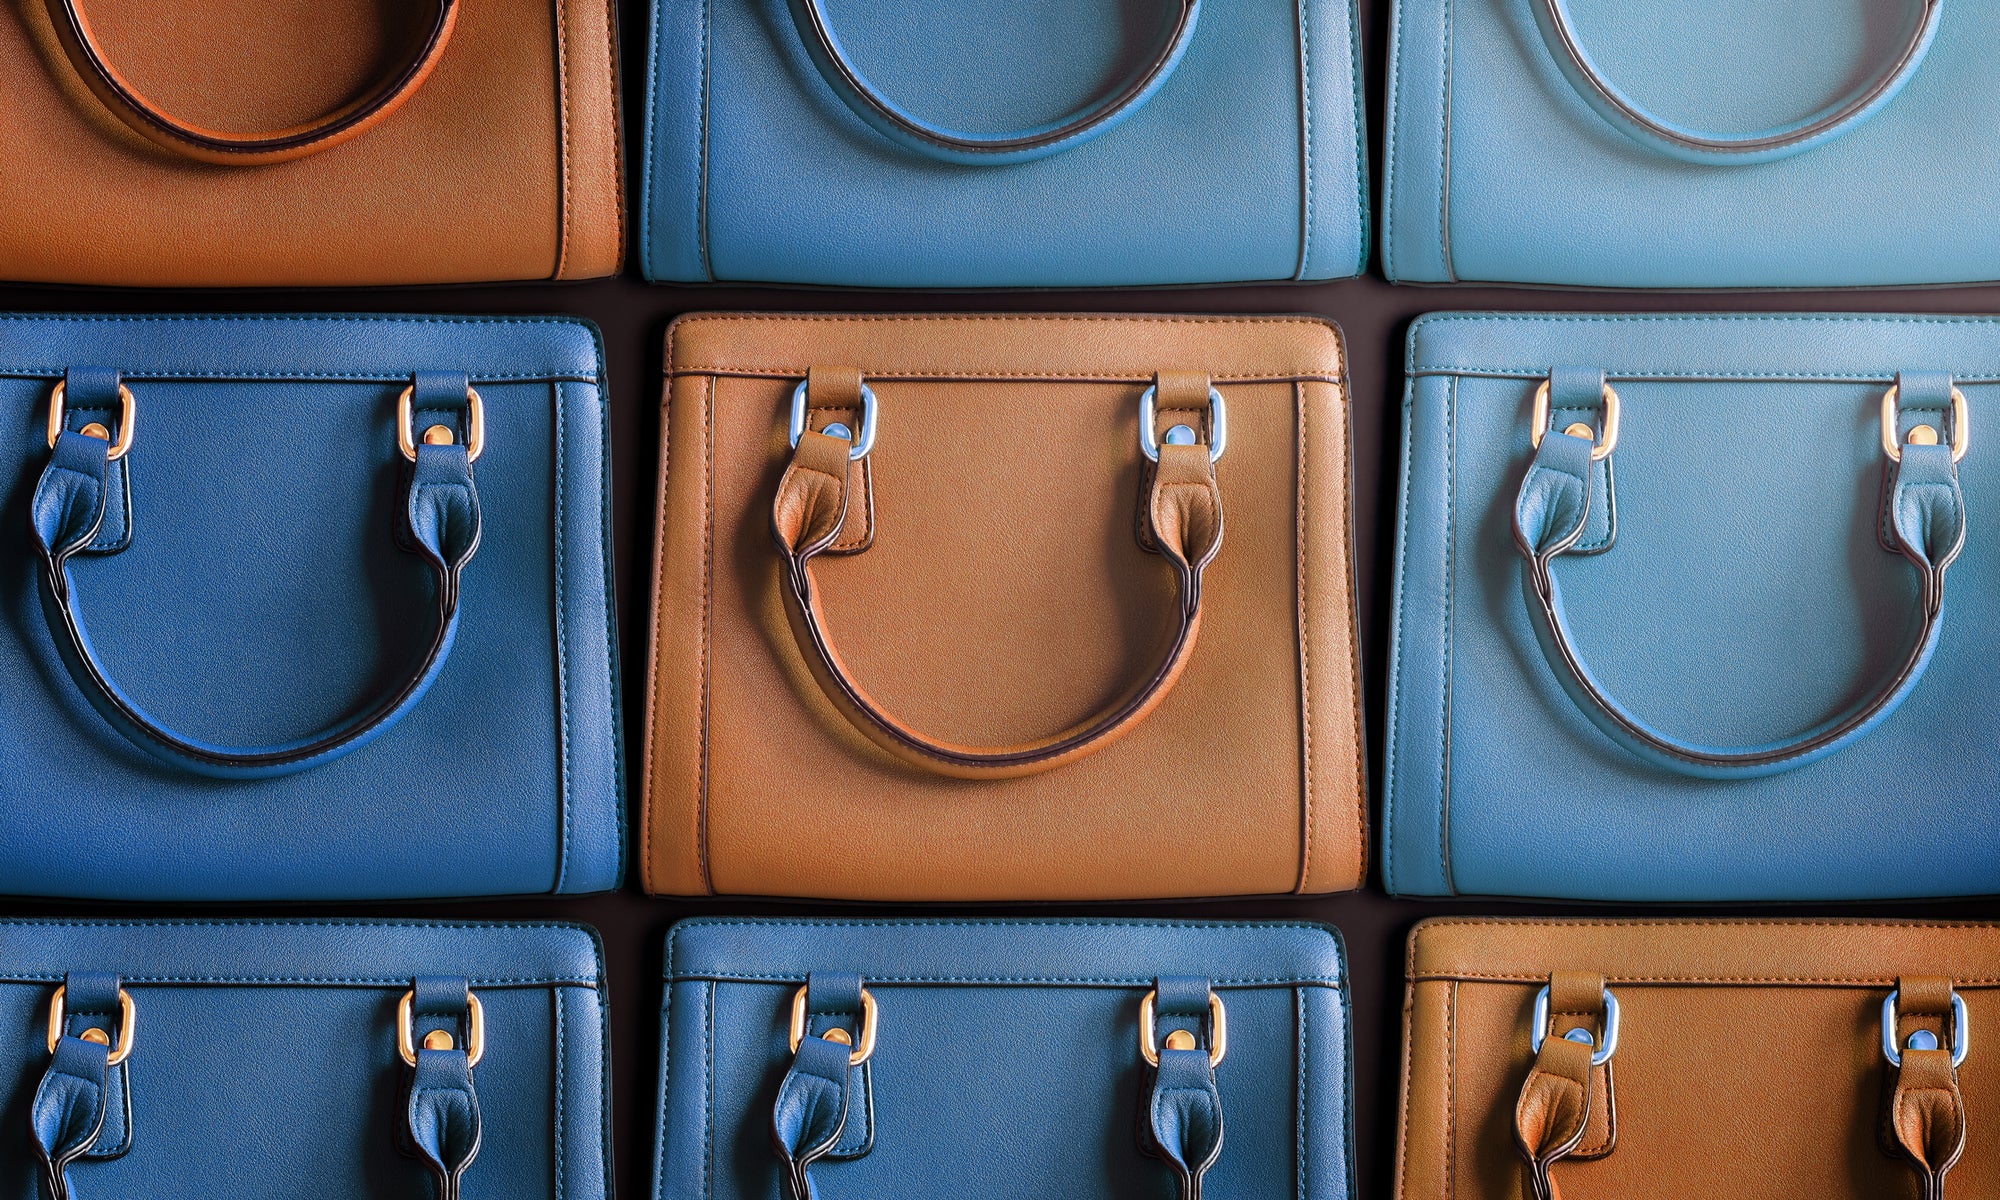 Handbag Collage in Blue and Brown